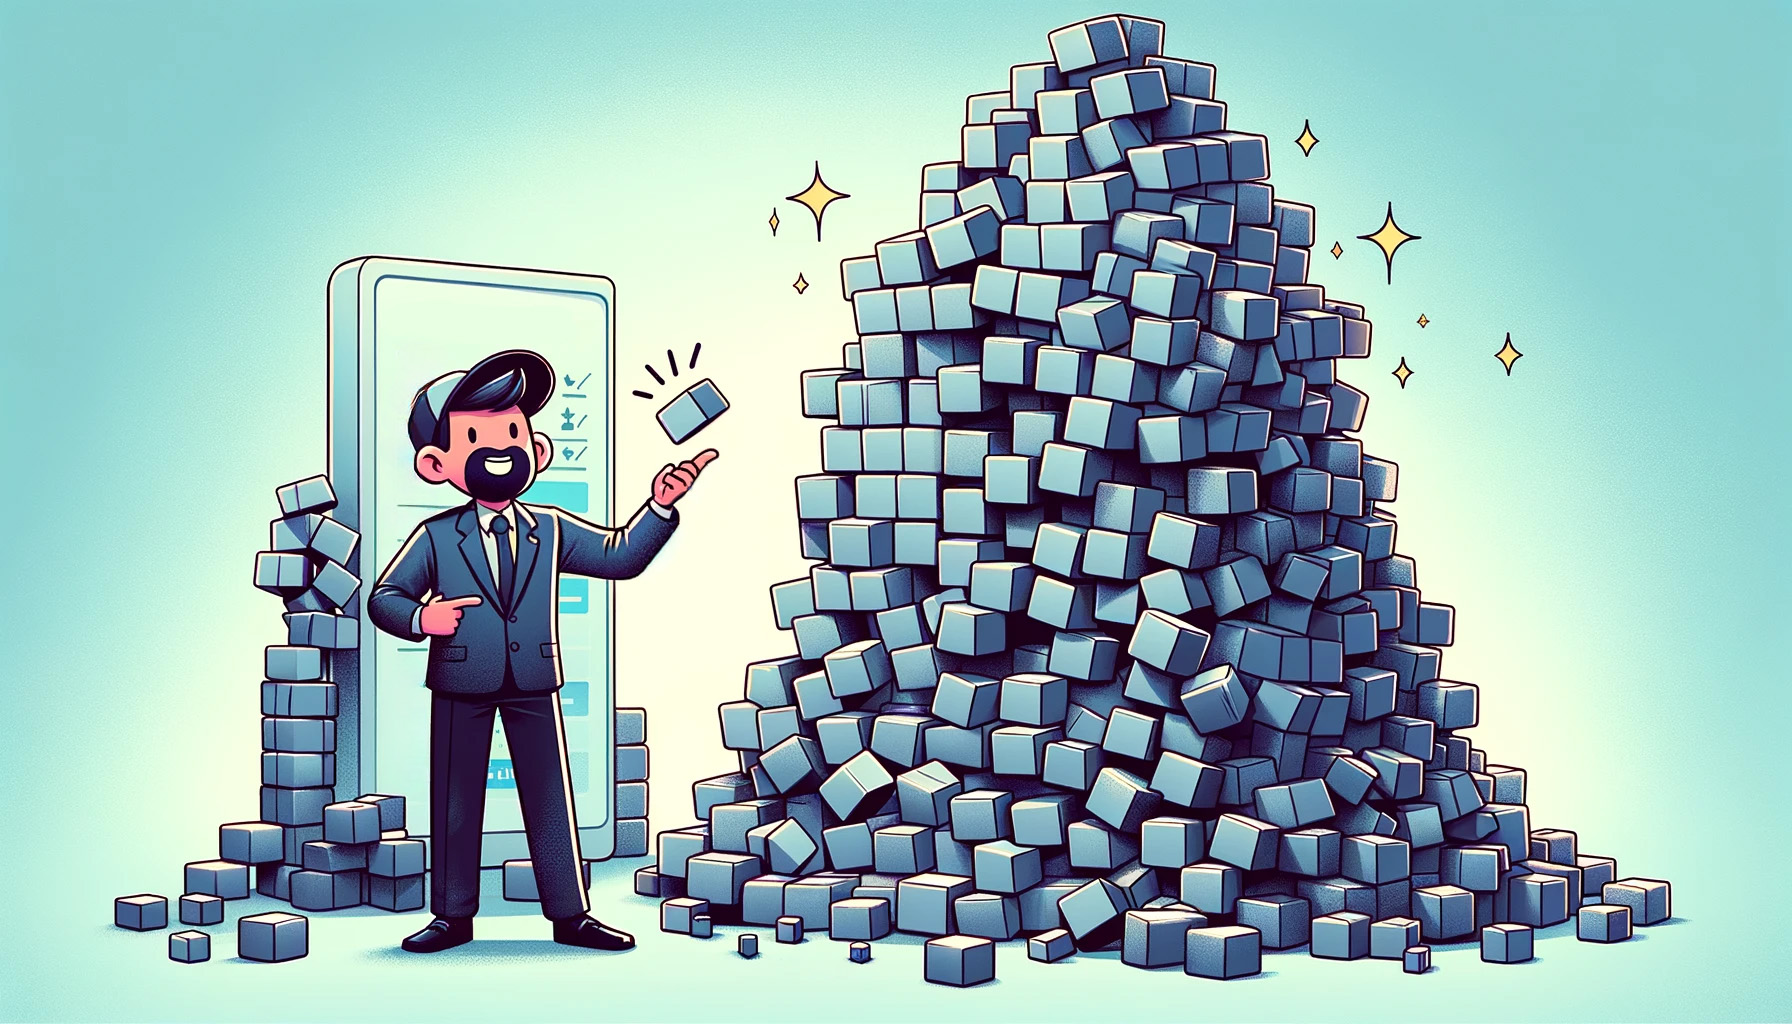 pile of cubes, businessman holding up one cube in front of a giant phone